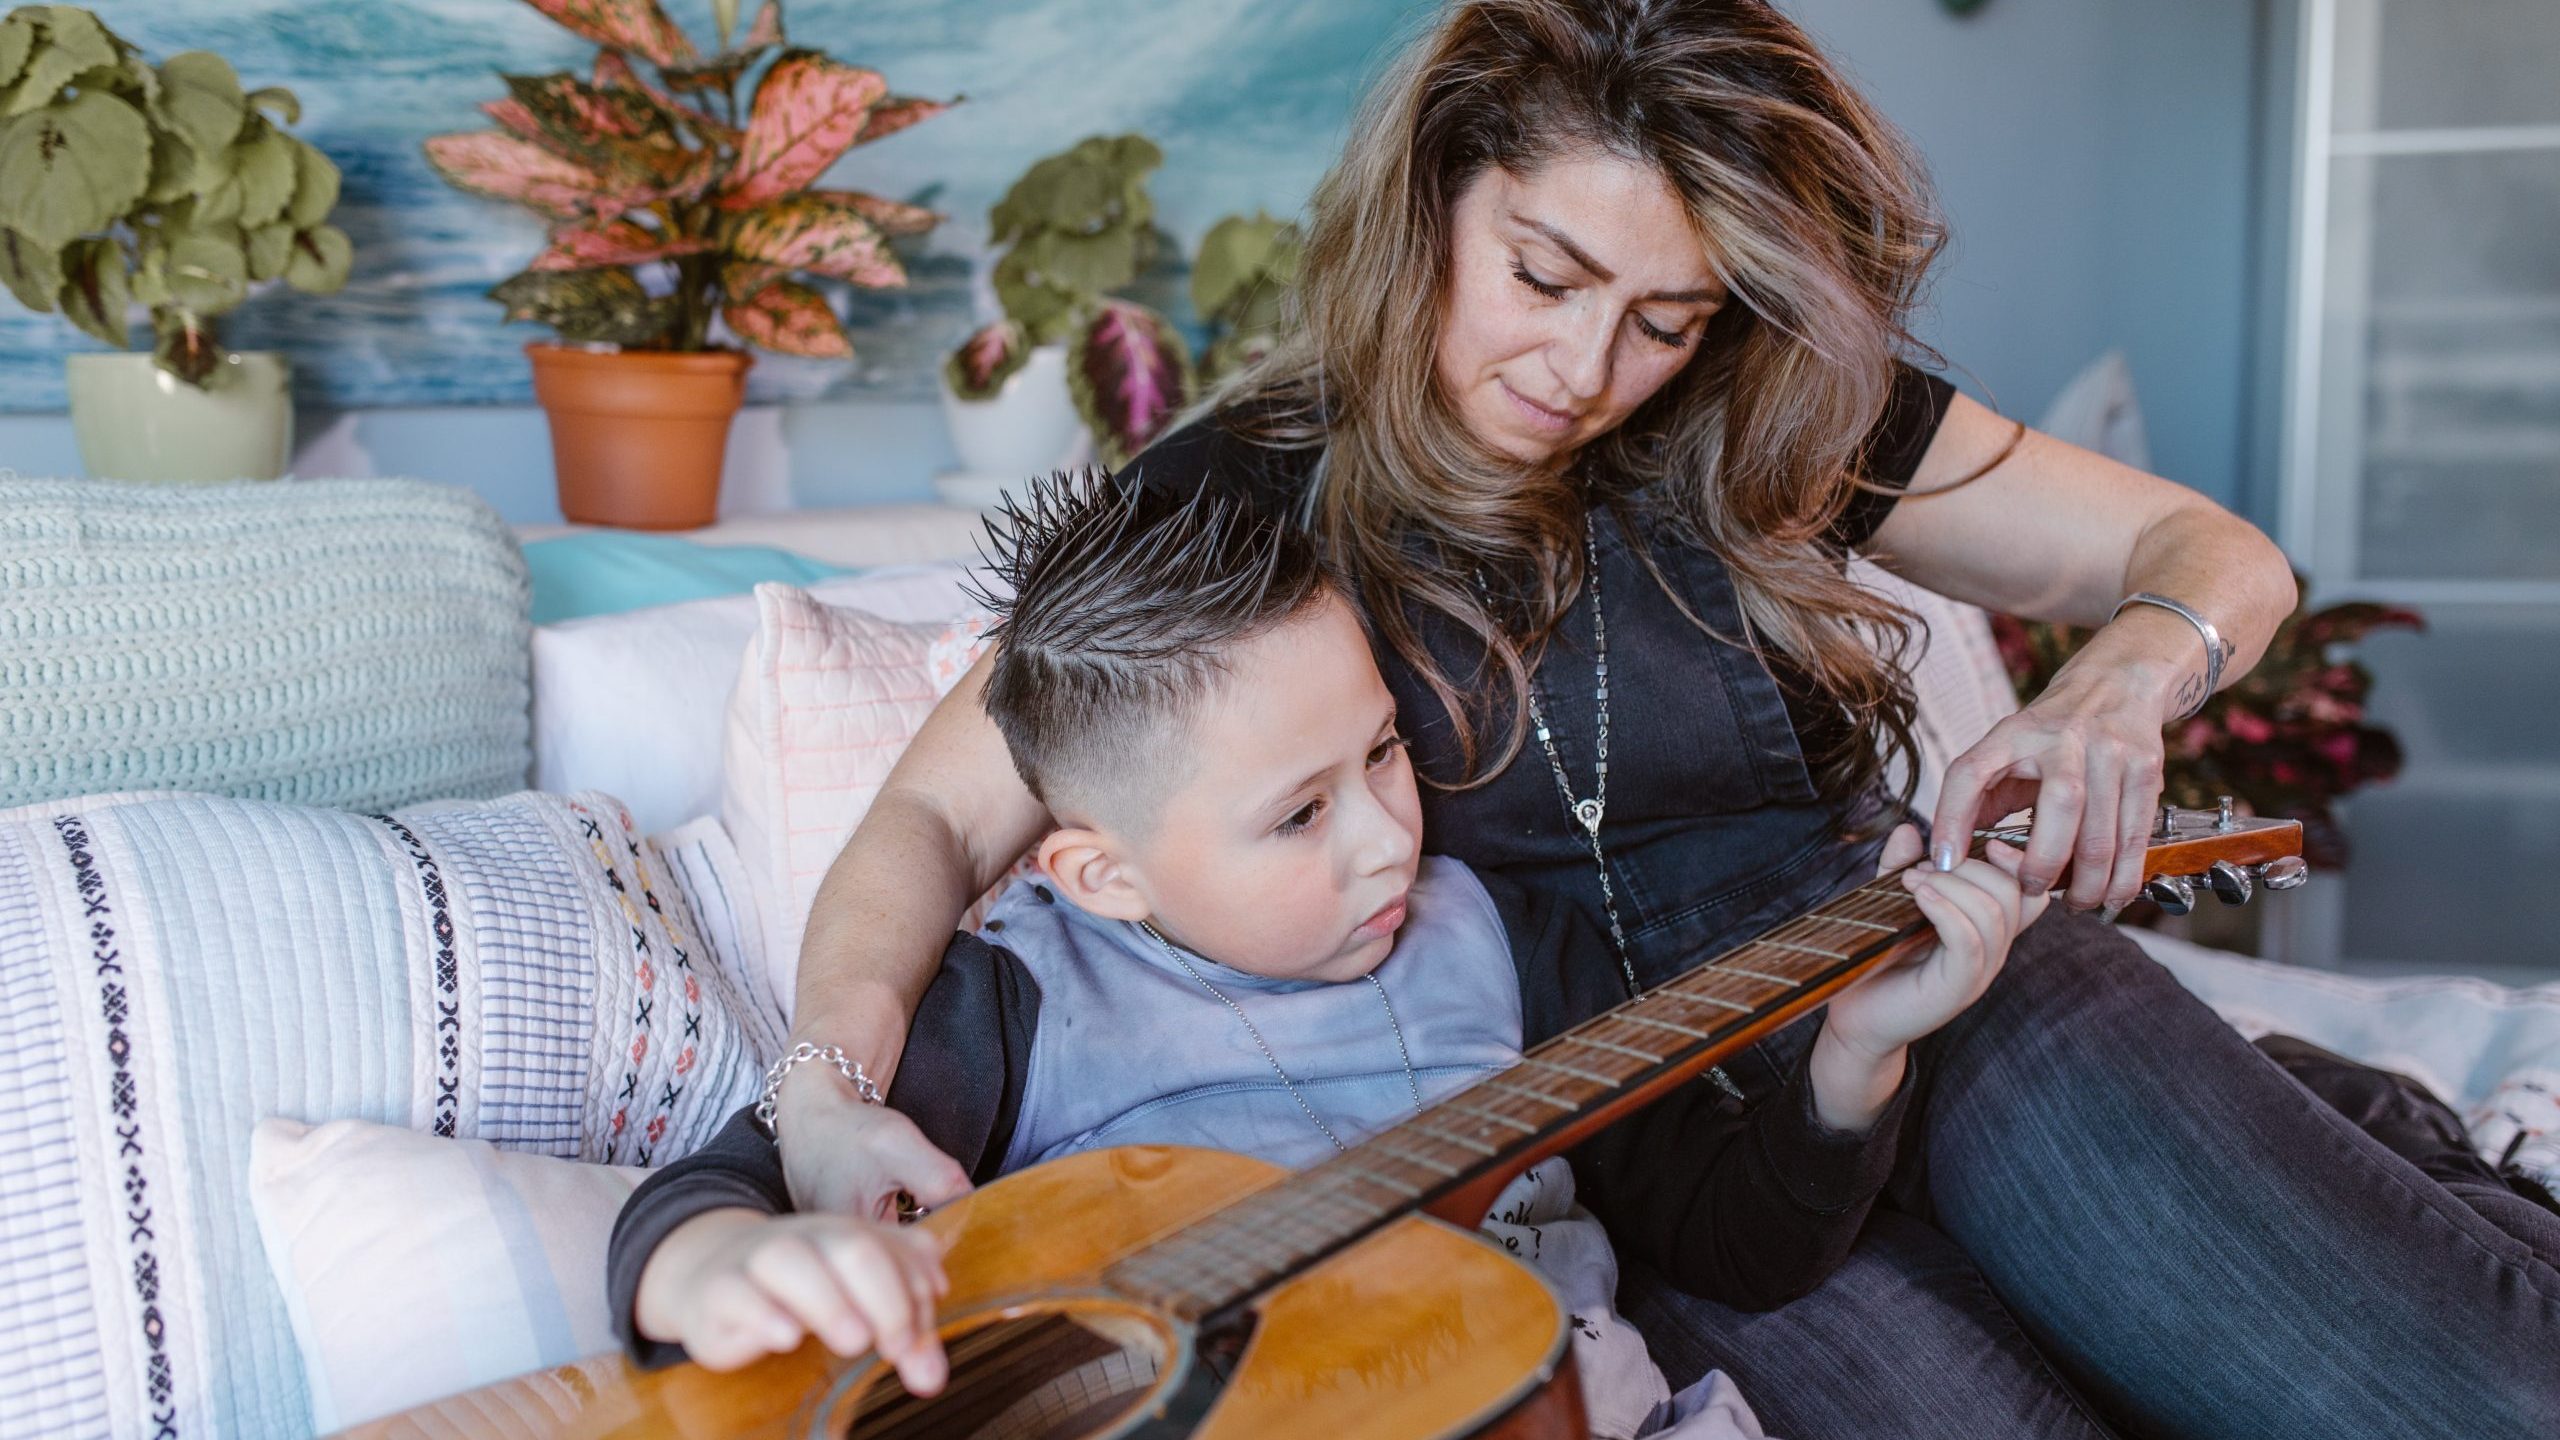 Woman helping young boy play an acoustic guitar.